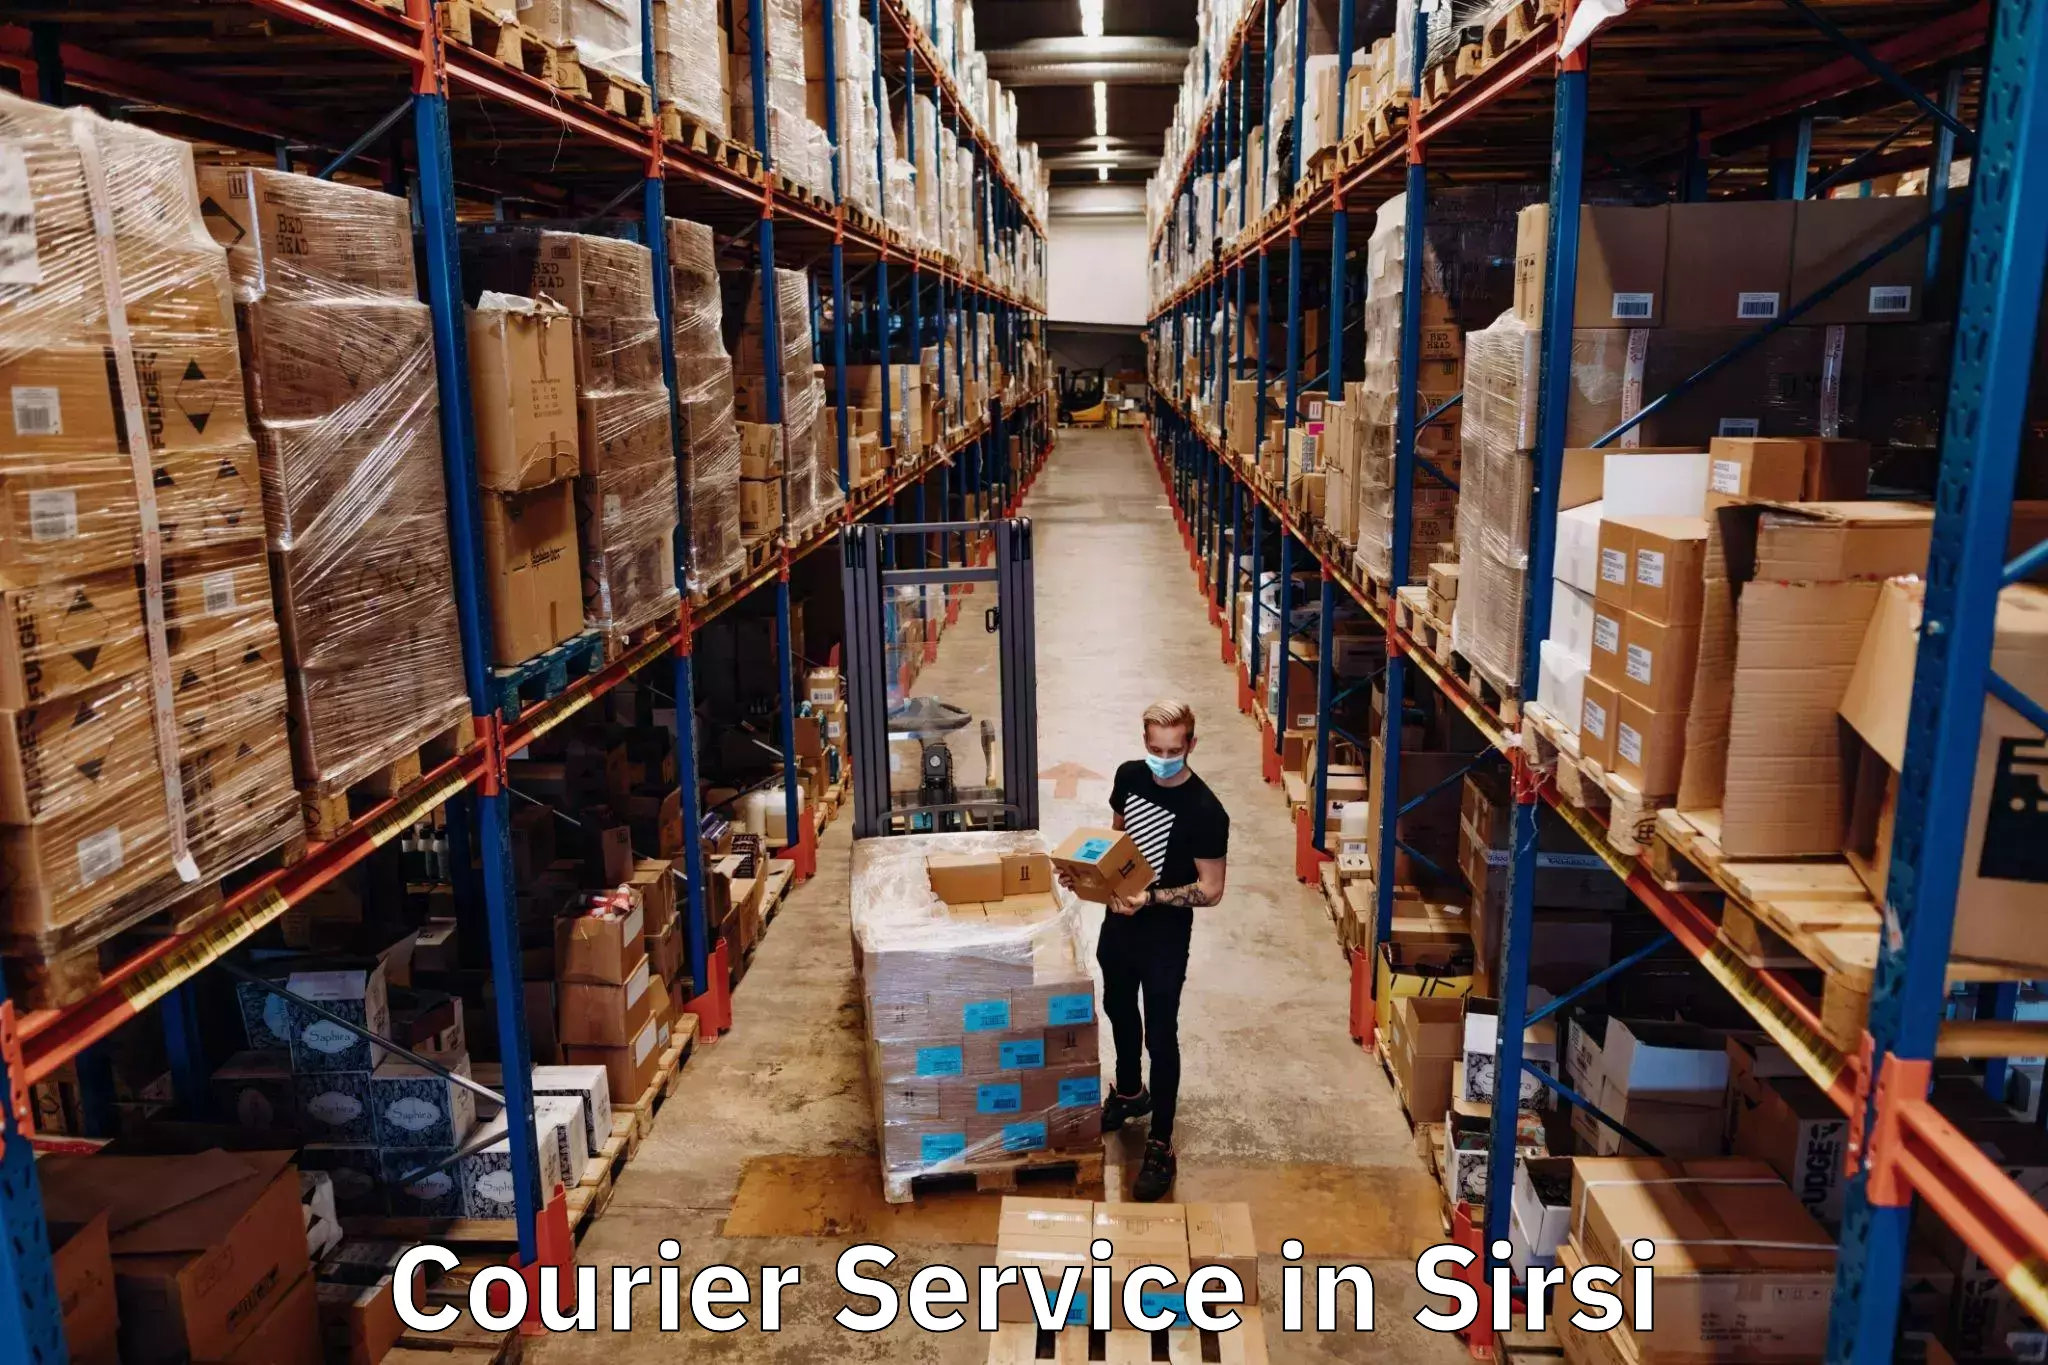 24/7 courier service in Sirsi